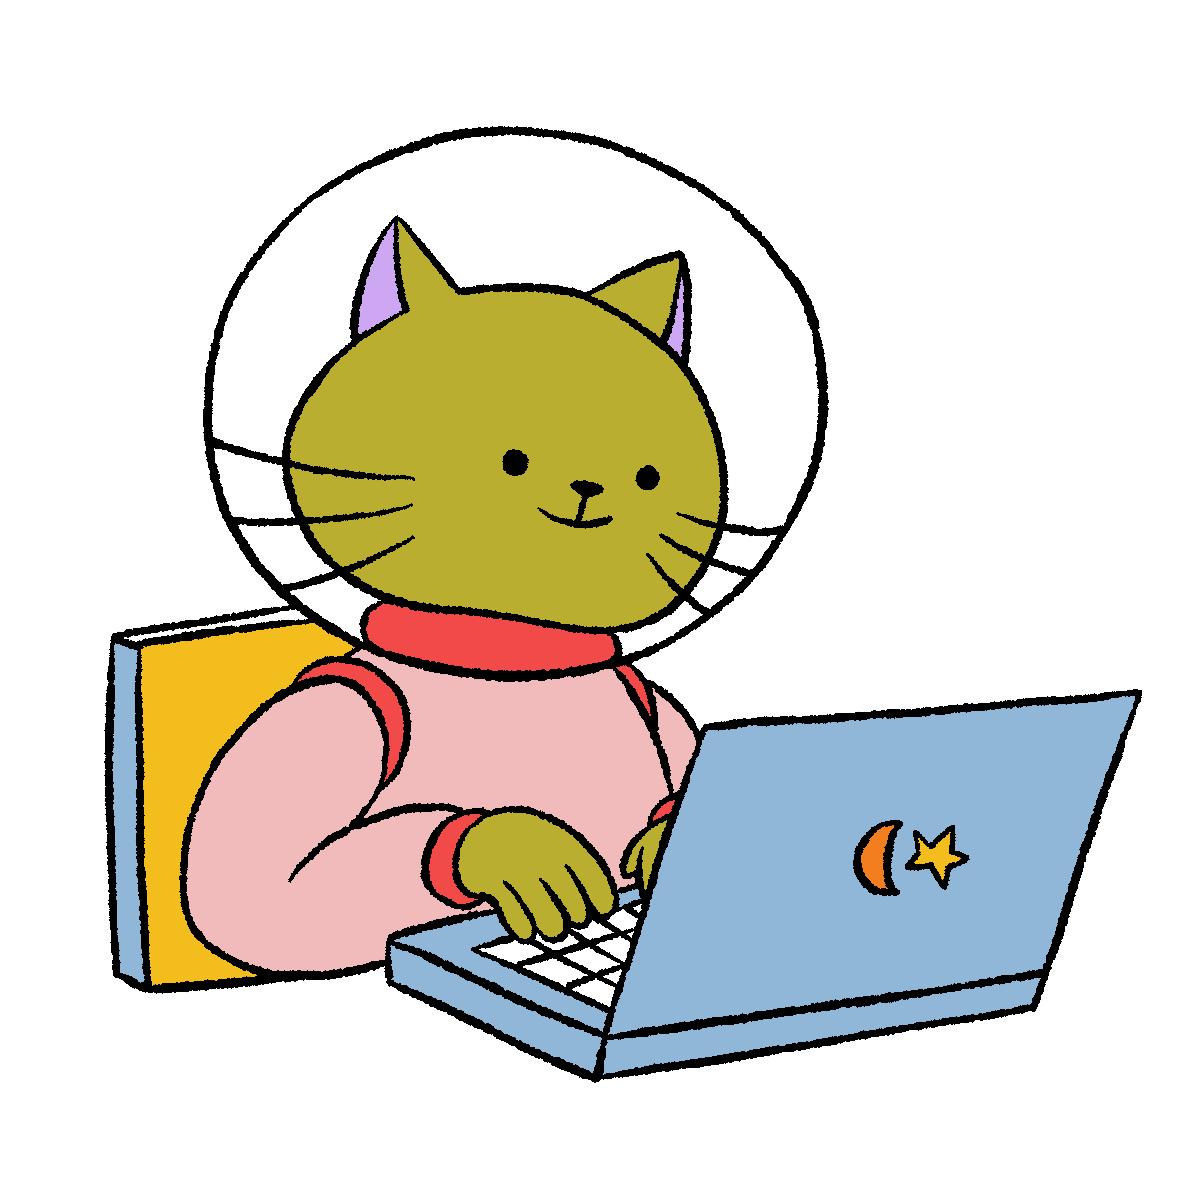 A cat in a space helmet types on a laptop